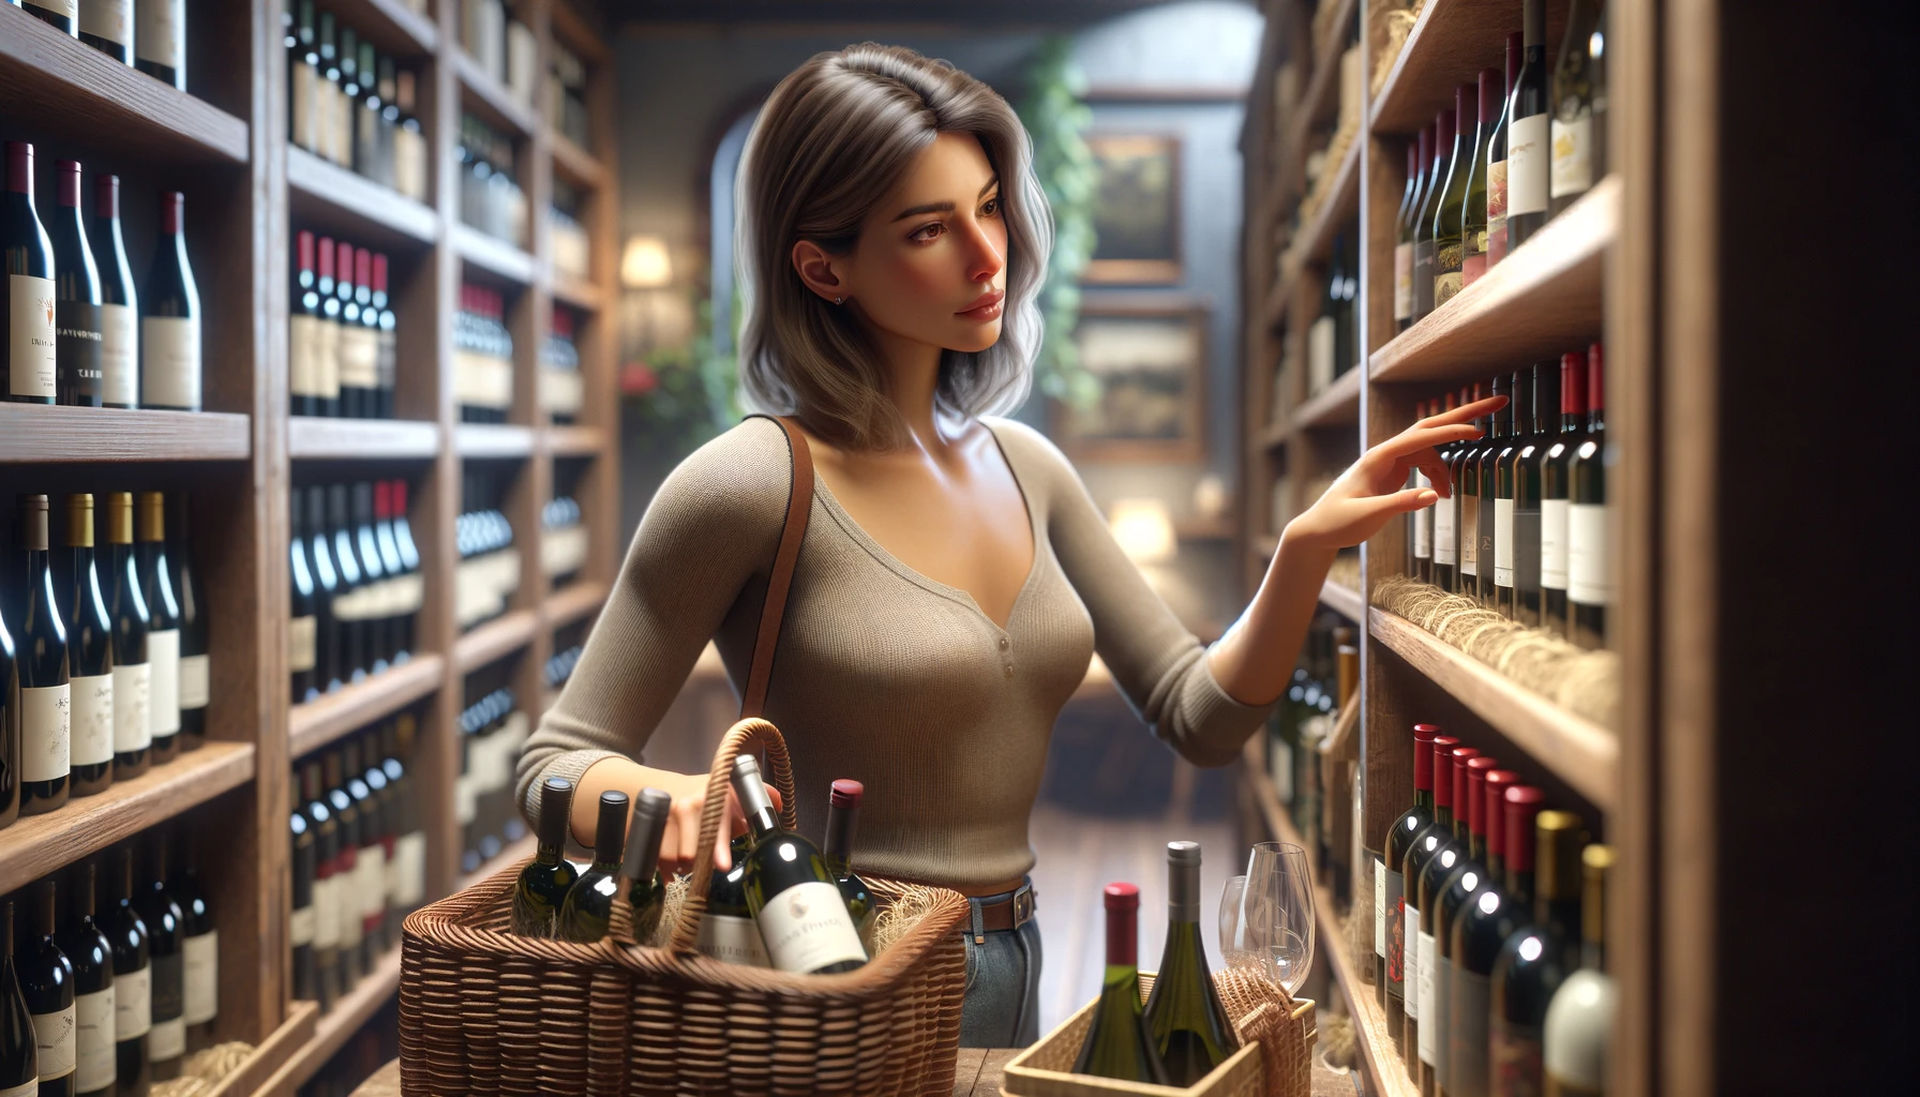 In a cozy wine shop, a Caucasian charming woman is thoughtfully selecting different types of wine bottles for a gift basket. 